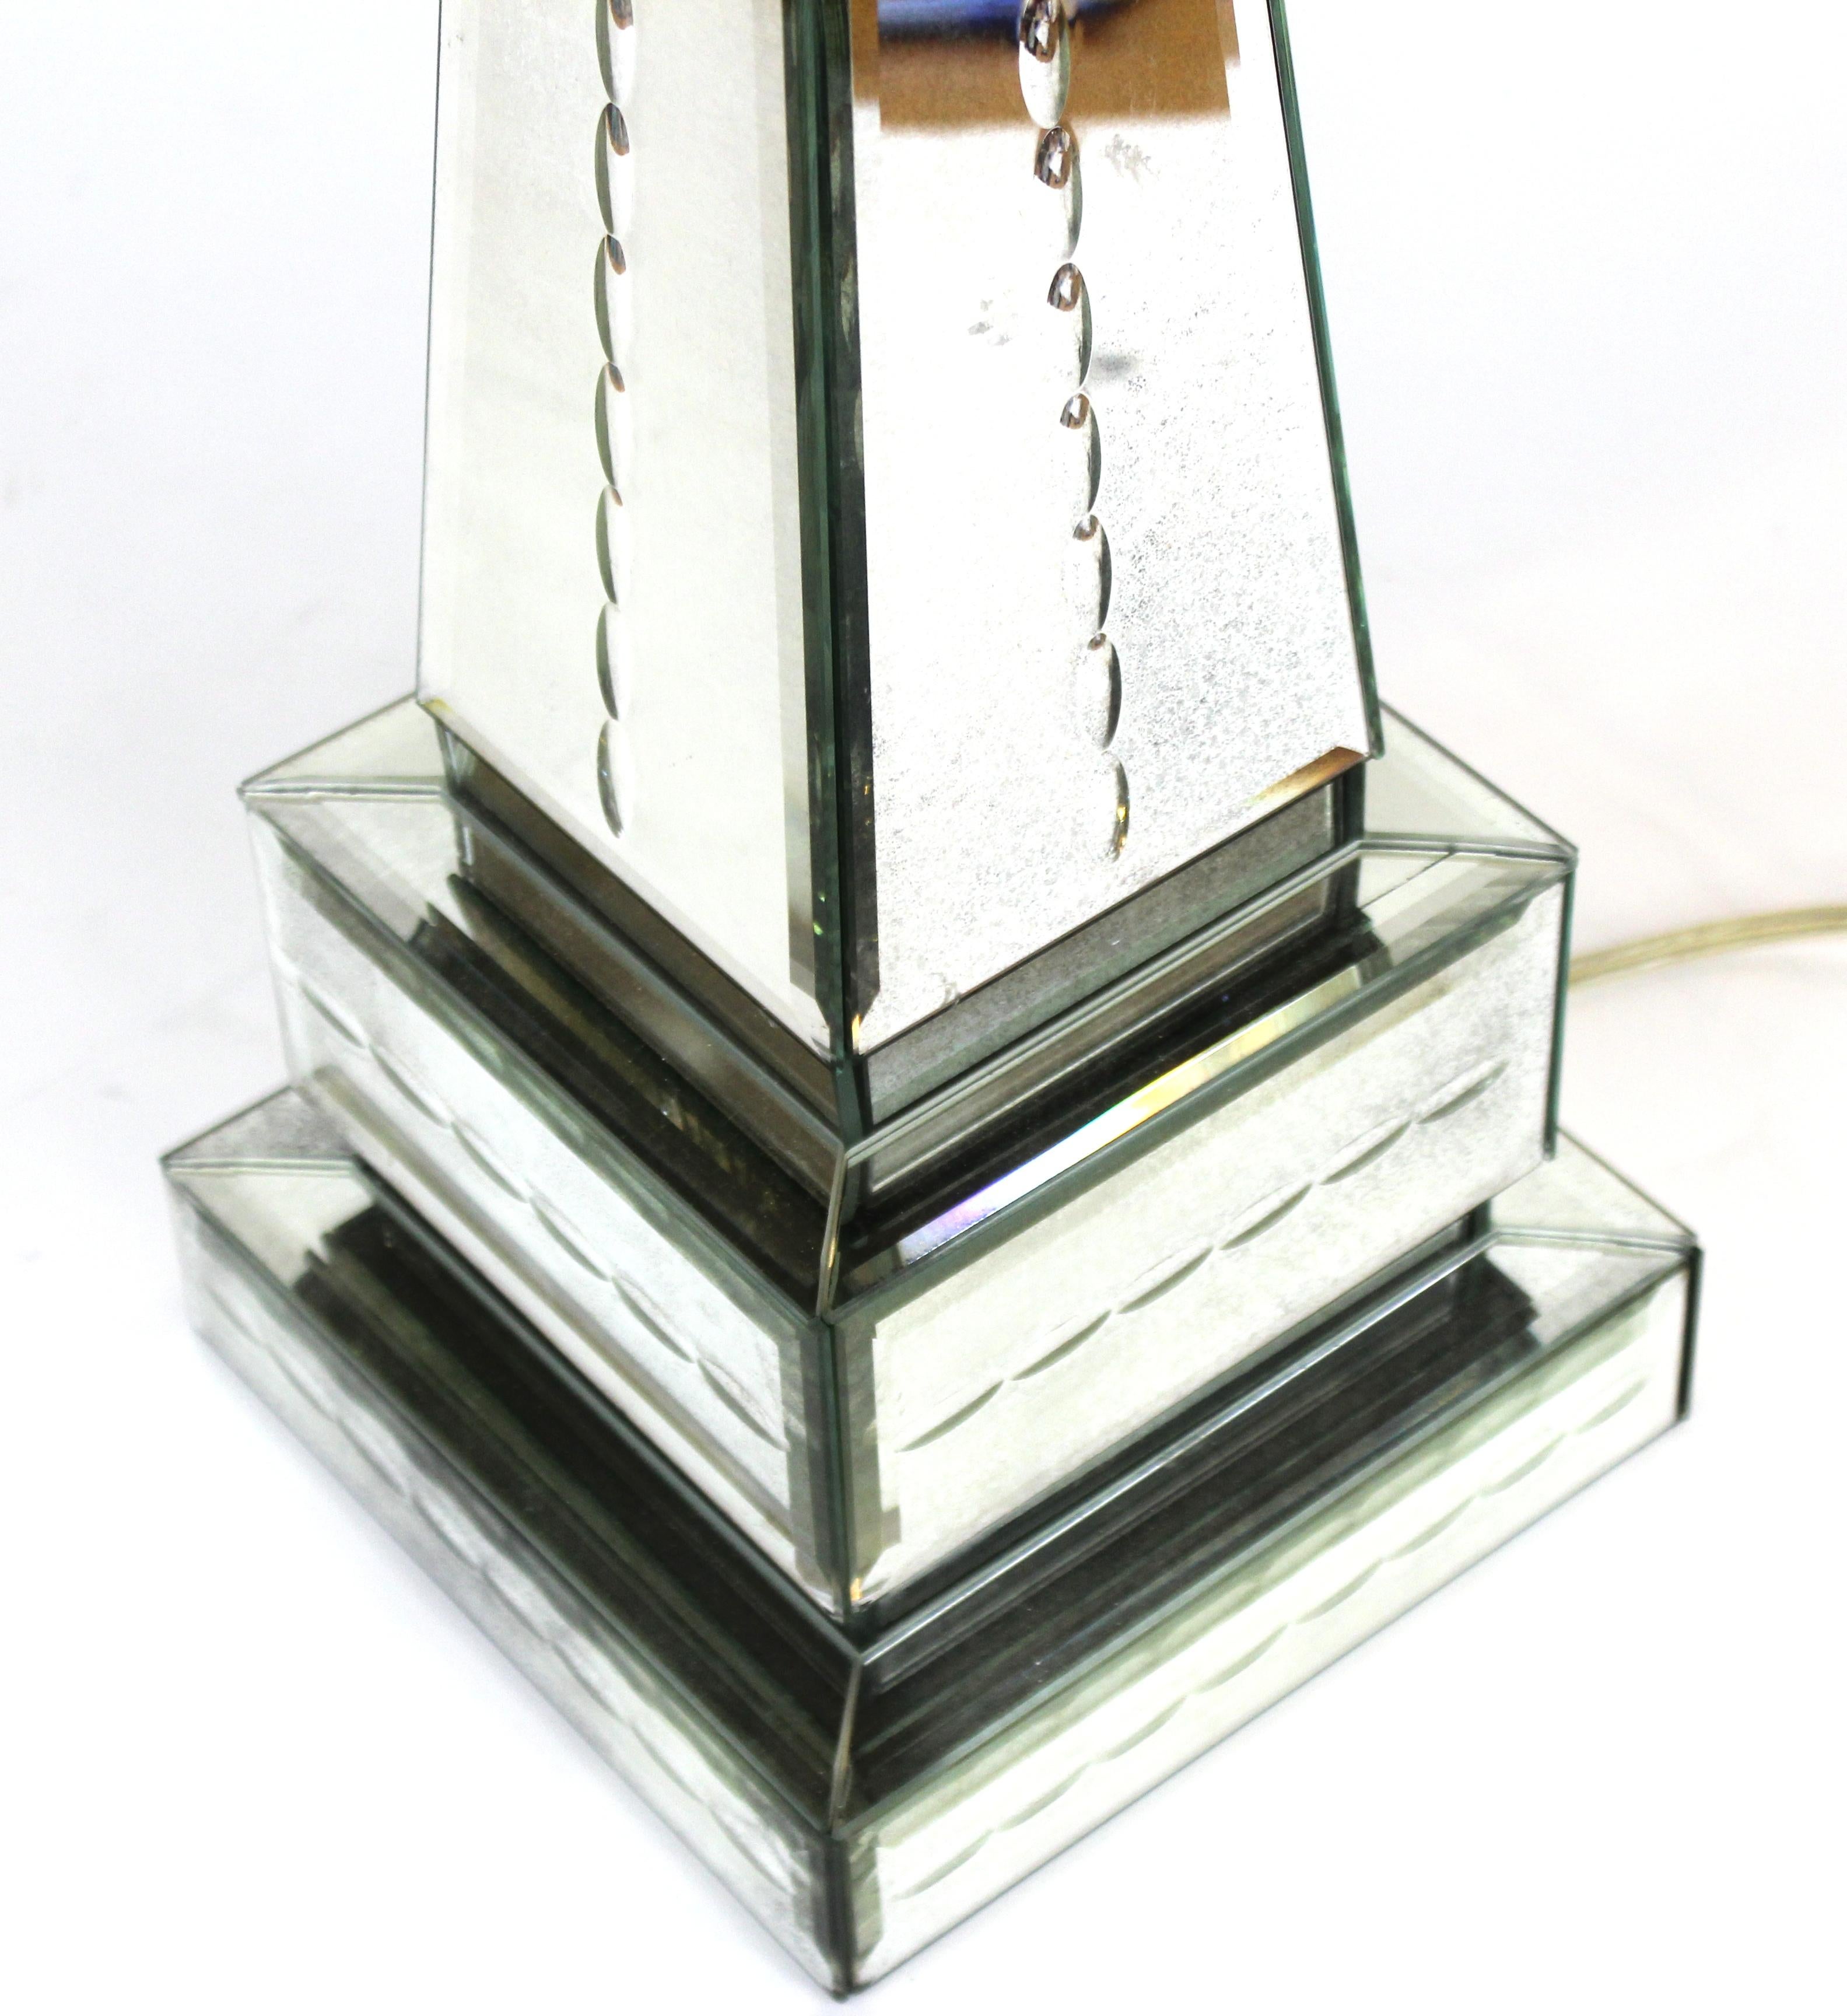 20th Century Hollywood Regency Style Mirrored Obelisk Table Lamps with Shades